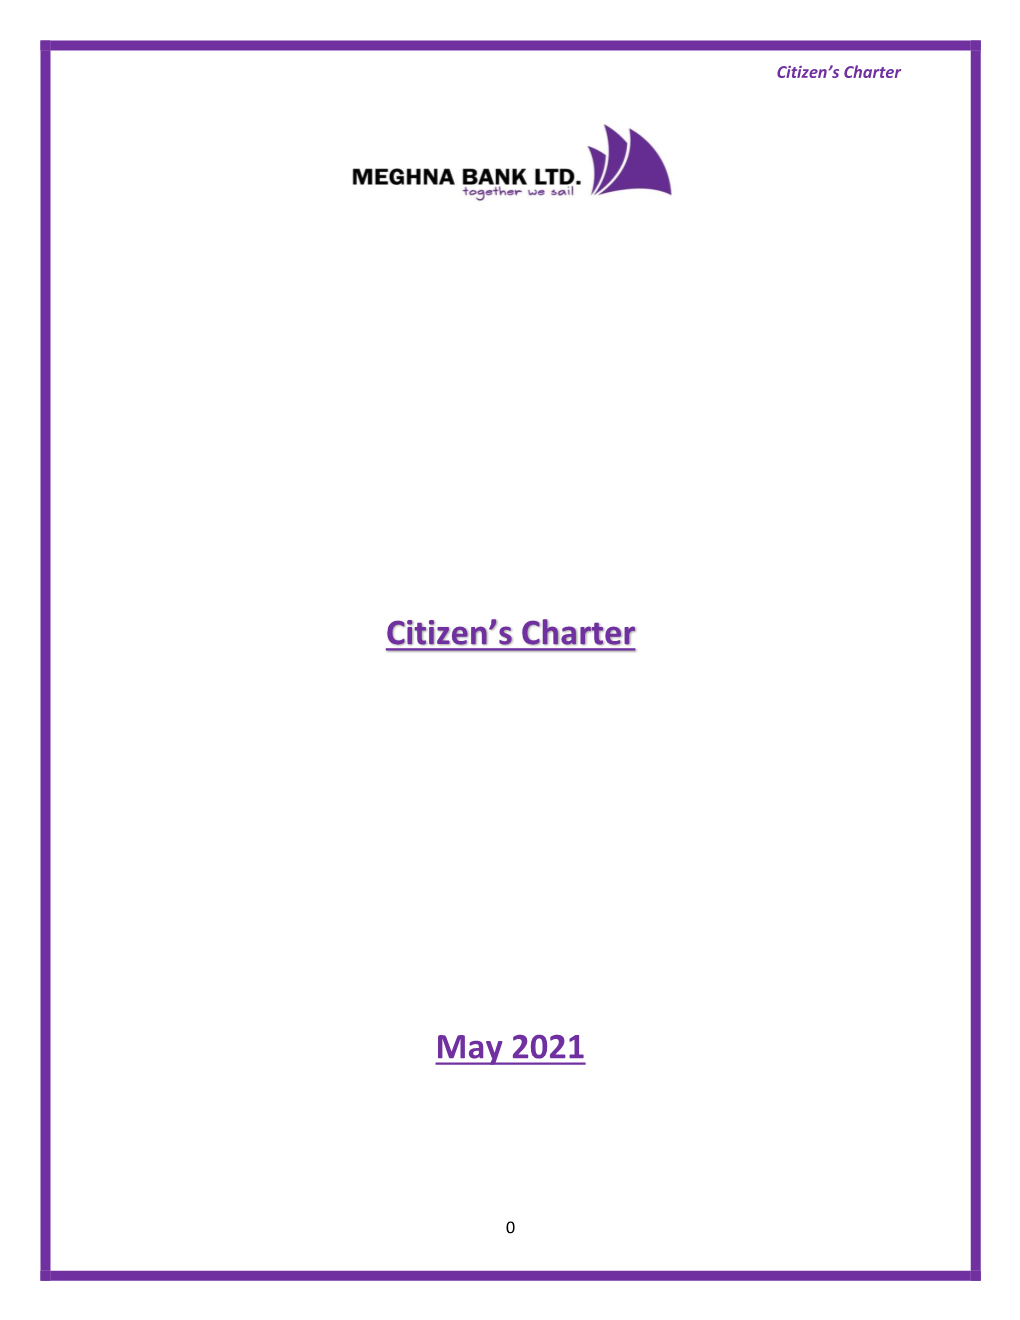 Citizen's Charter May 2021